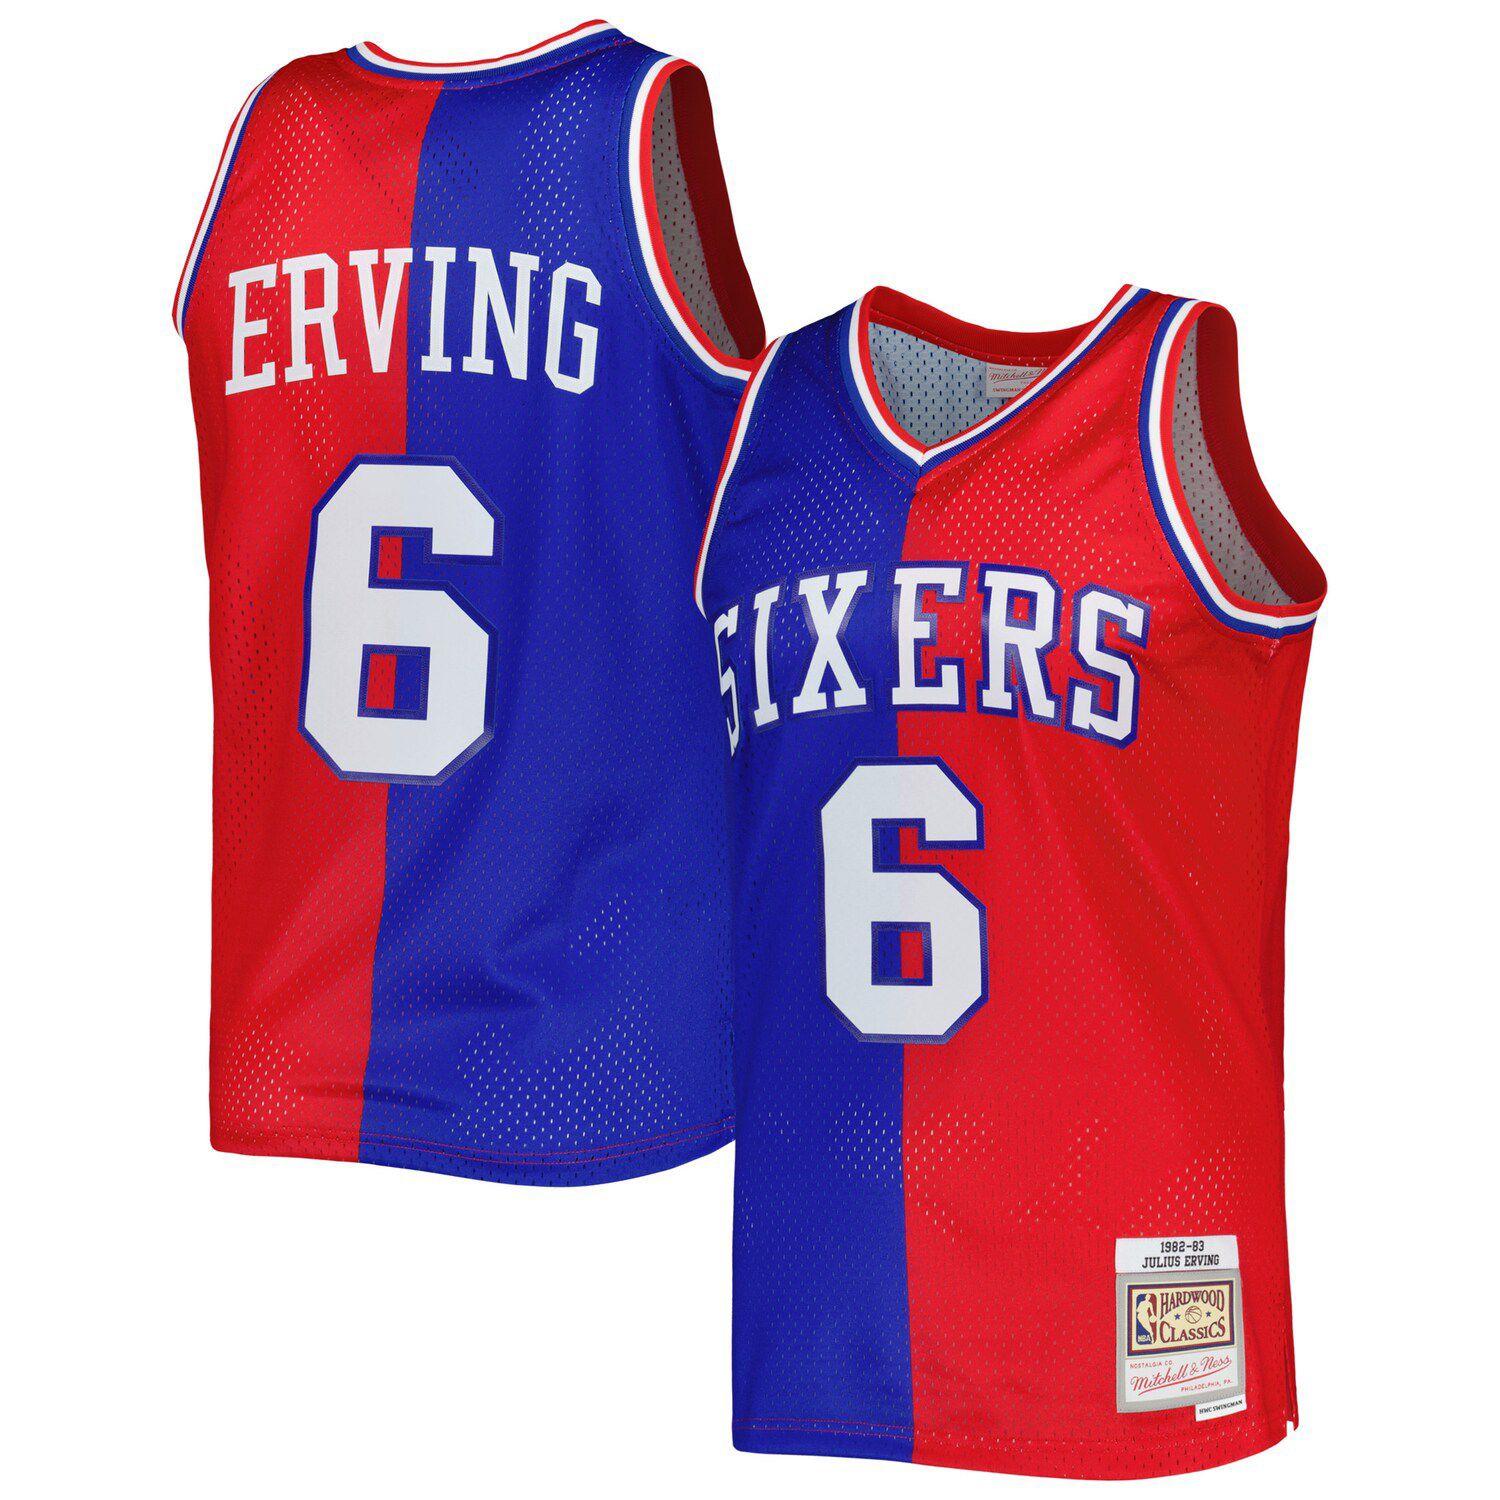 Infant Mitchell & Ness Julius Erving Red Philadelphia 76ers Retired Player Jersey